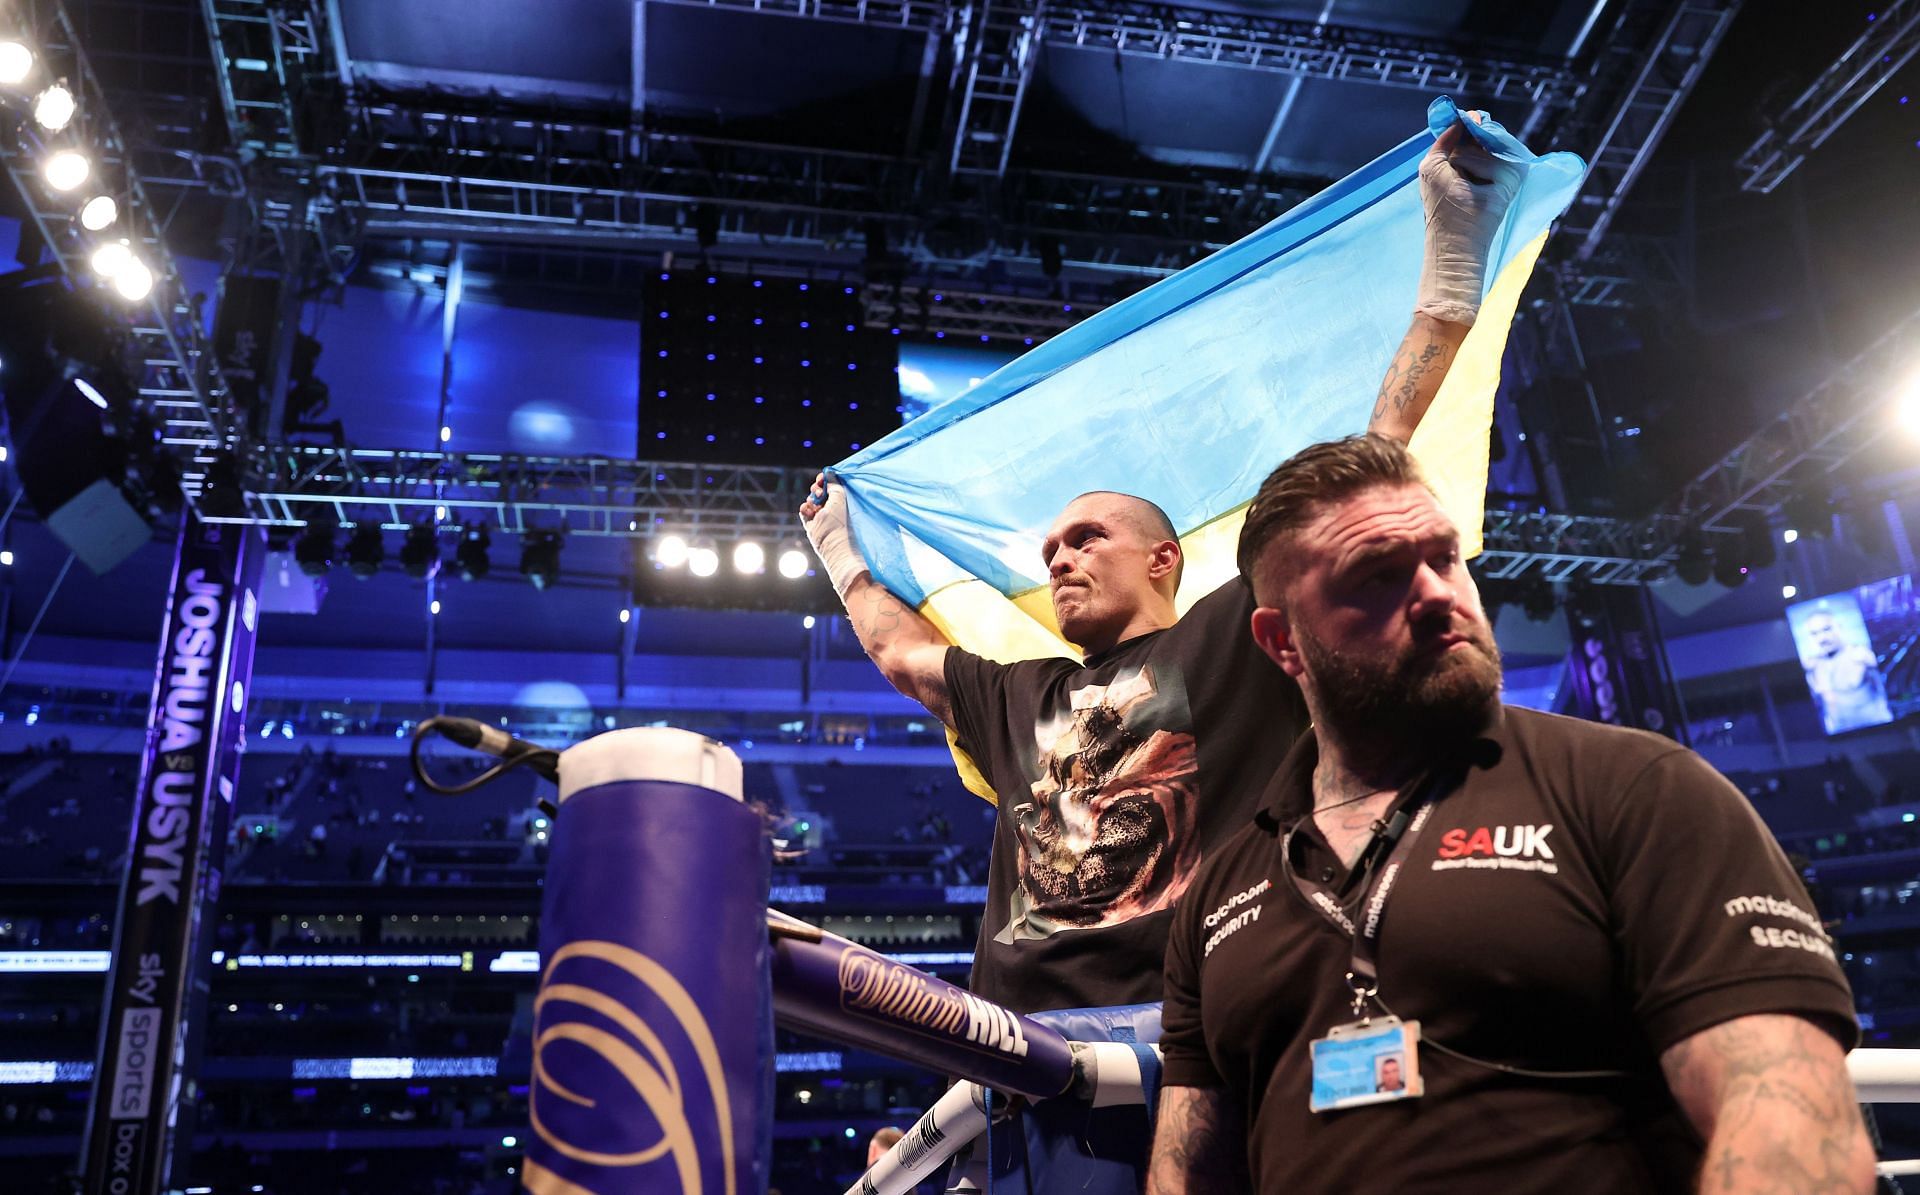 Oleksandr Usyk has discussed his motivation ahead of facing Anthony Joshua again.